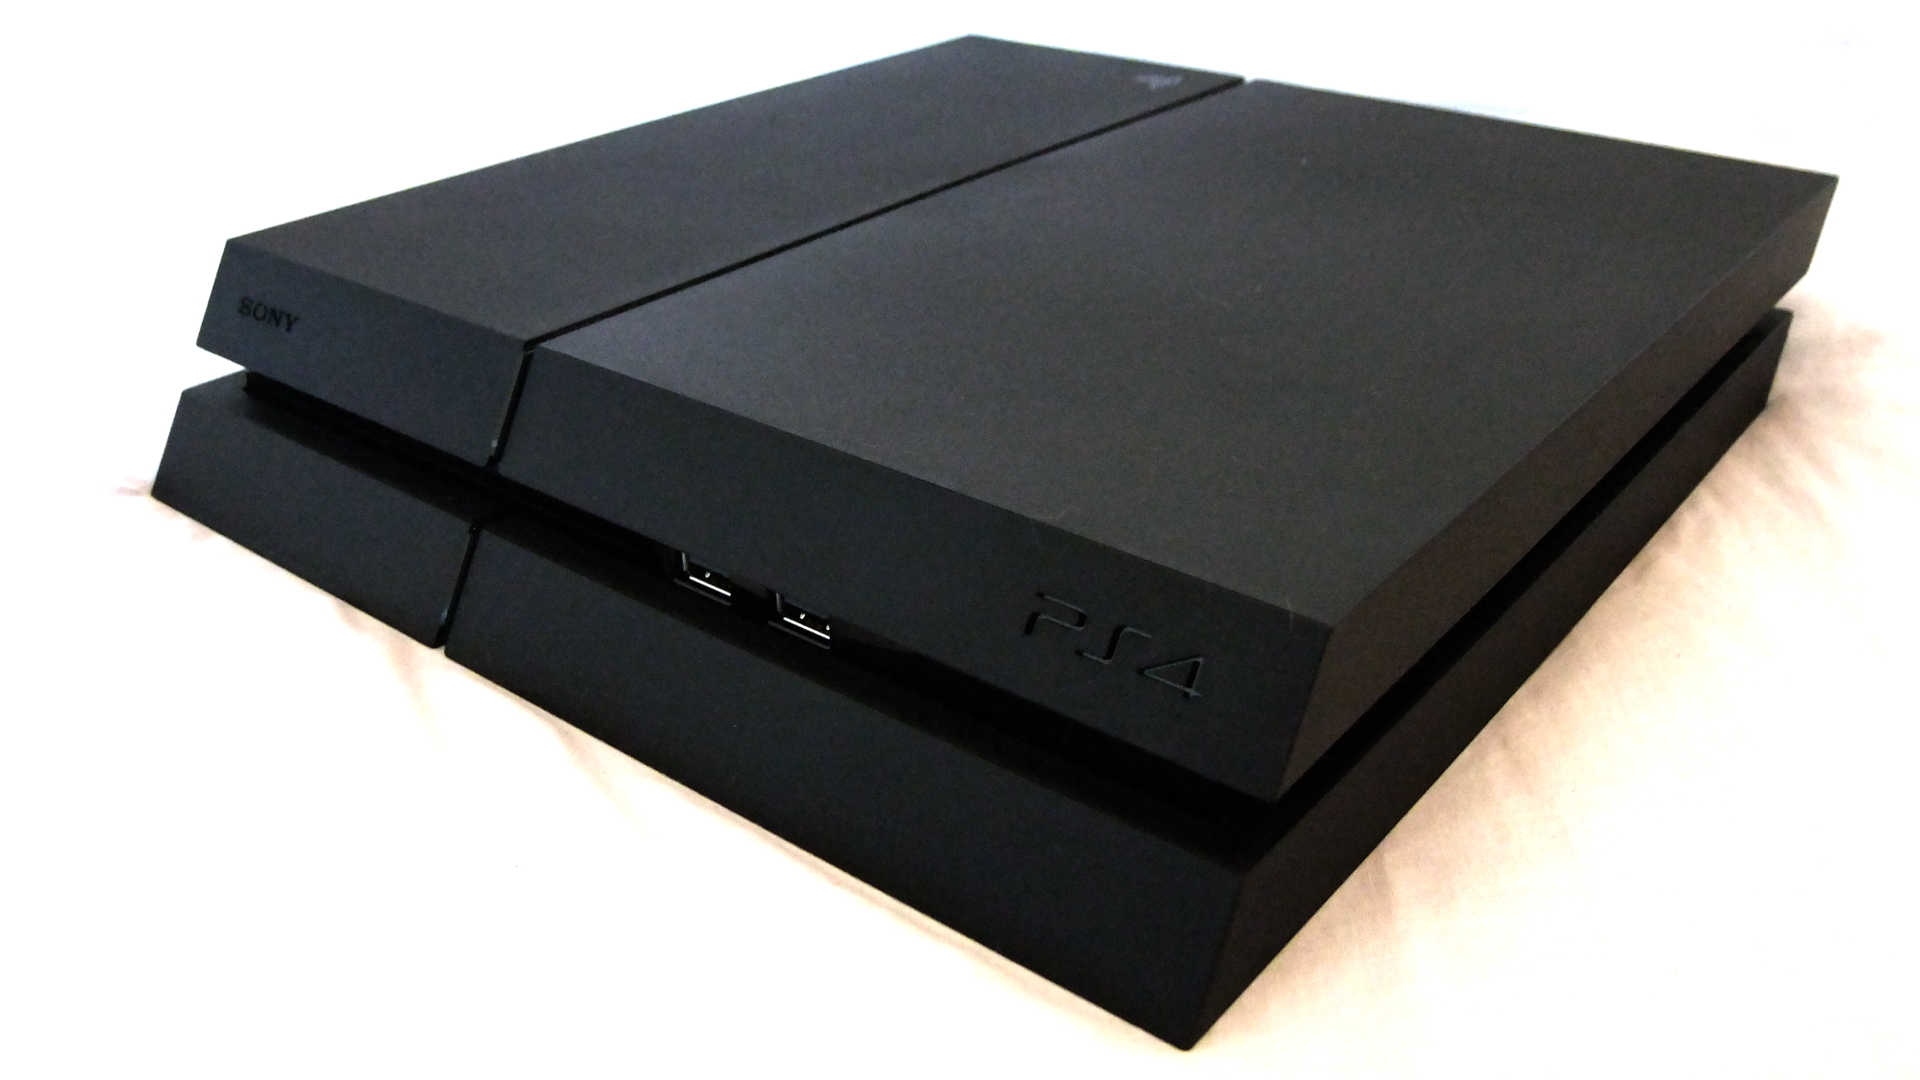 If you're about to buy a new 1TB PlayStation 4, don't. Here's why